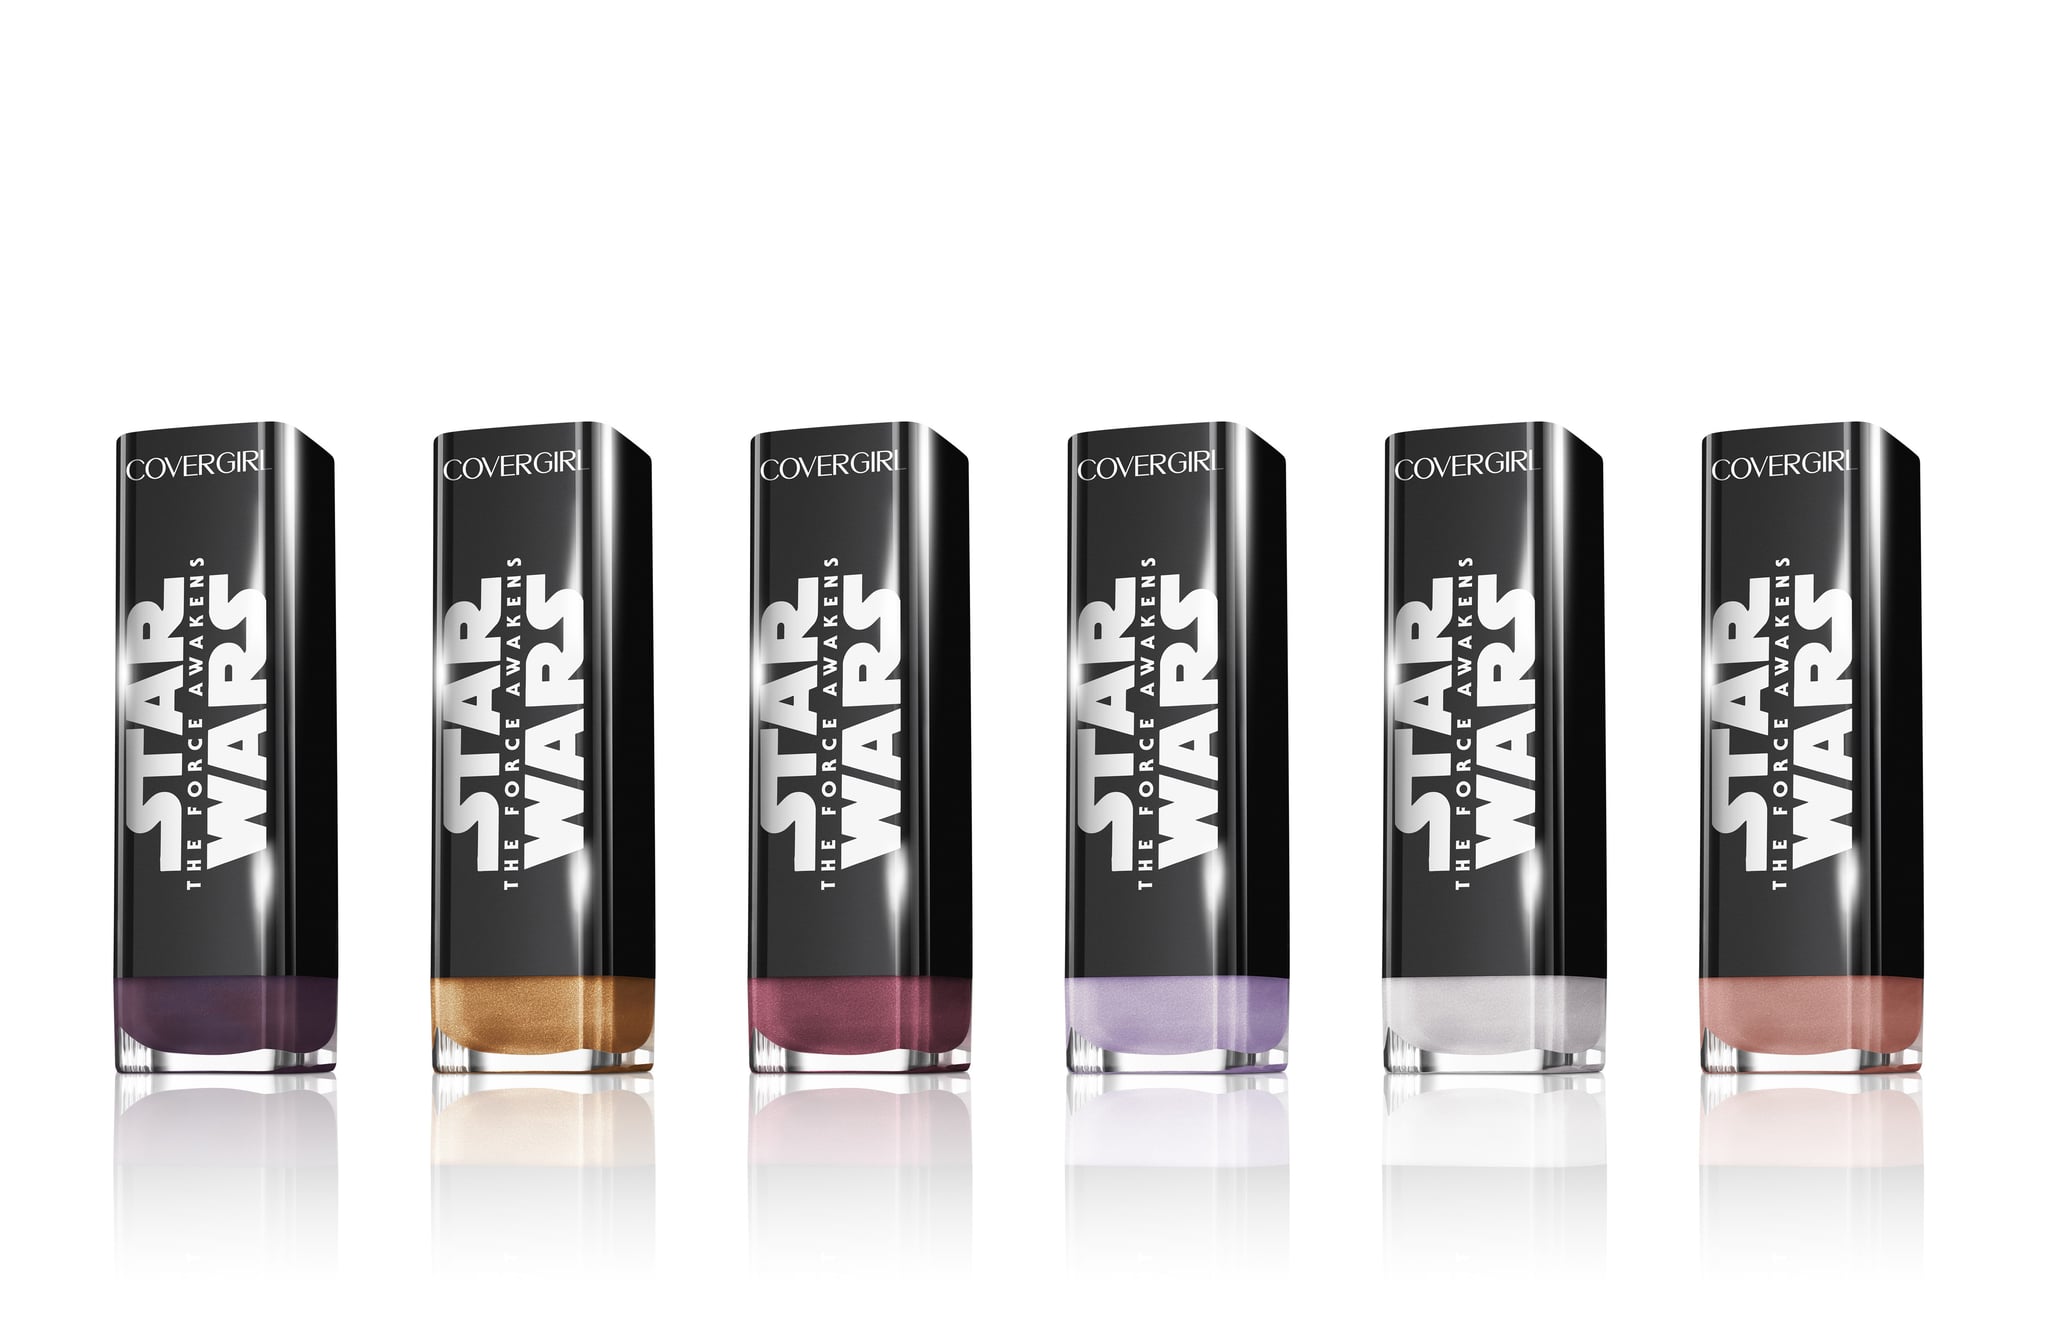 Lashes And Lightsabers: The Star Wars Makeup Collection